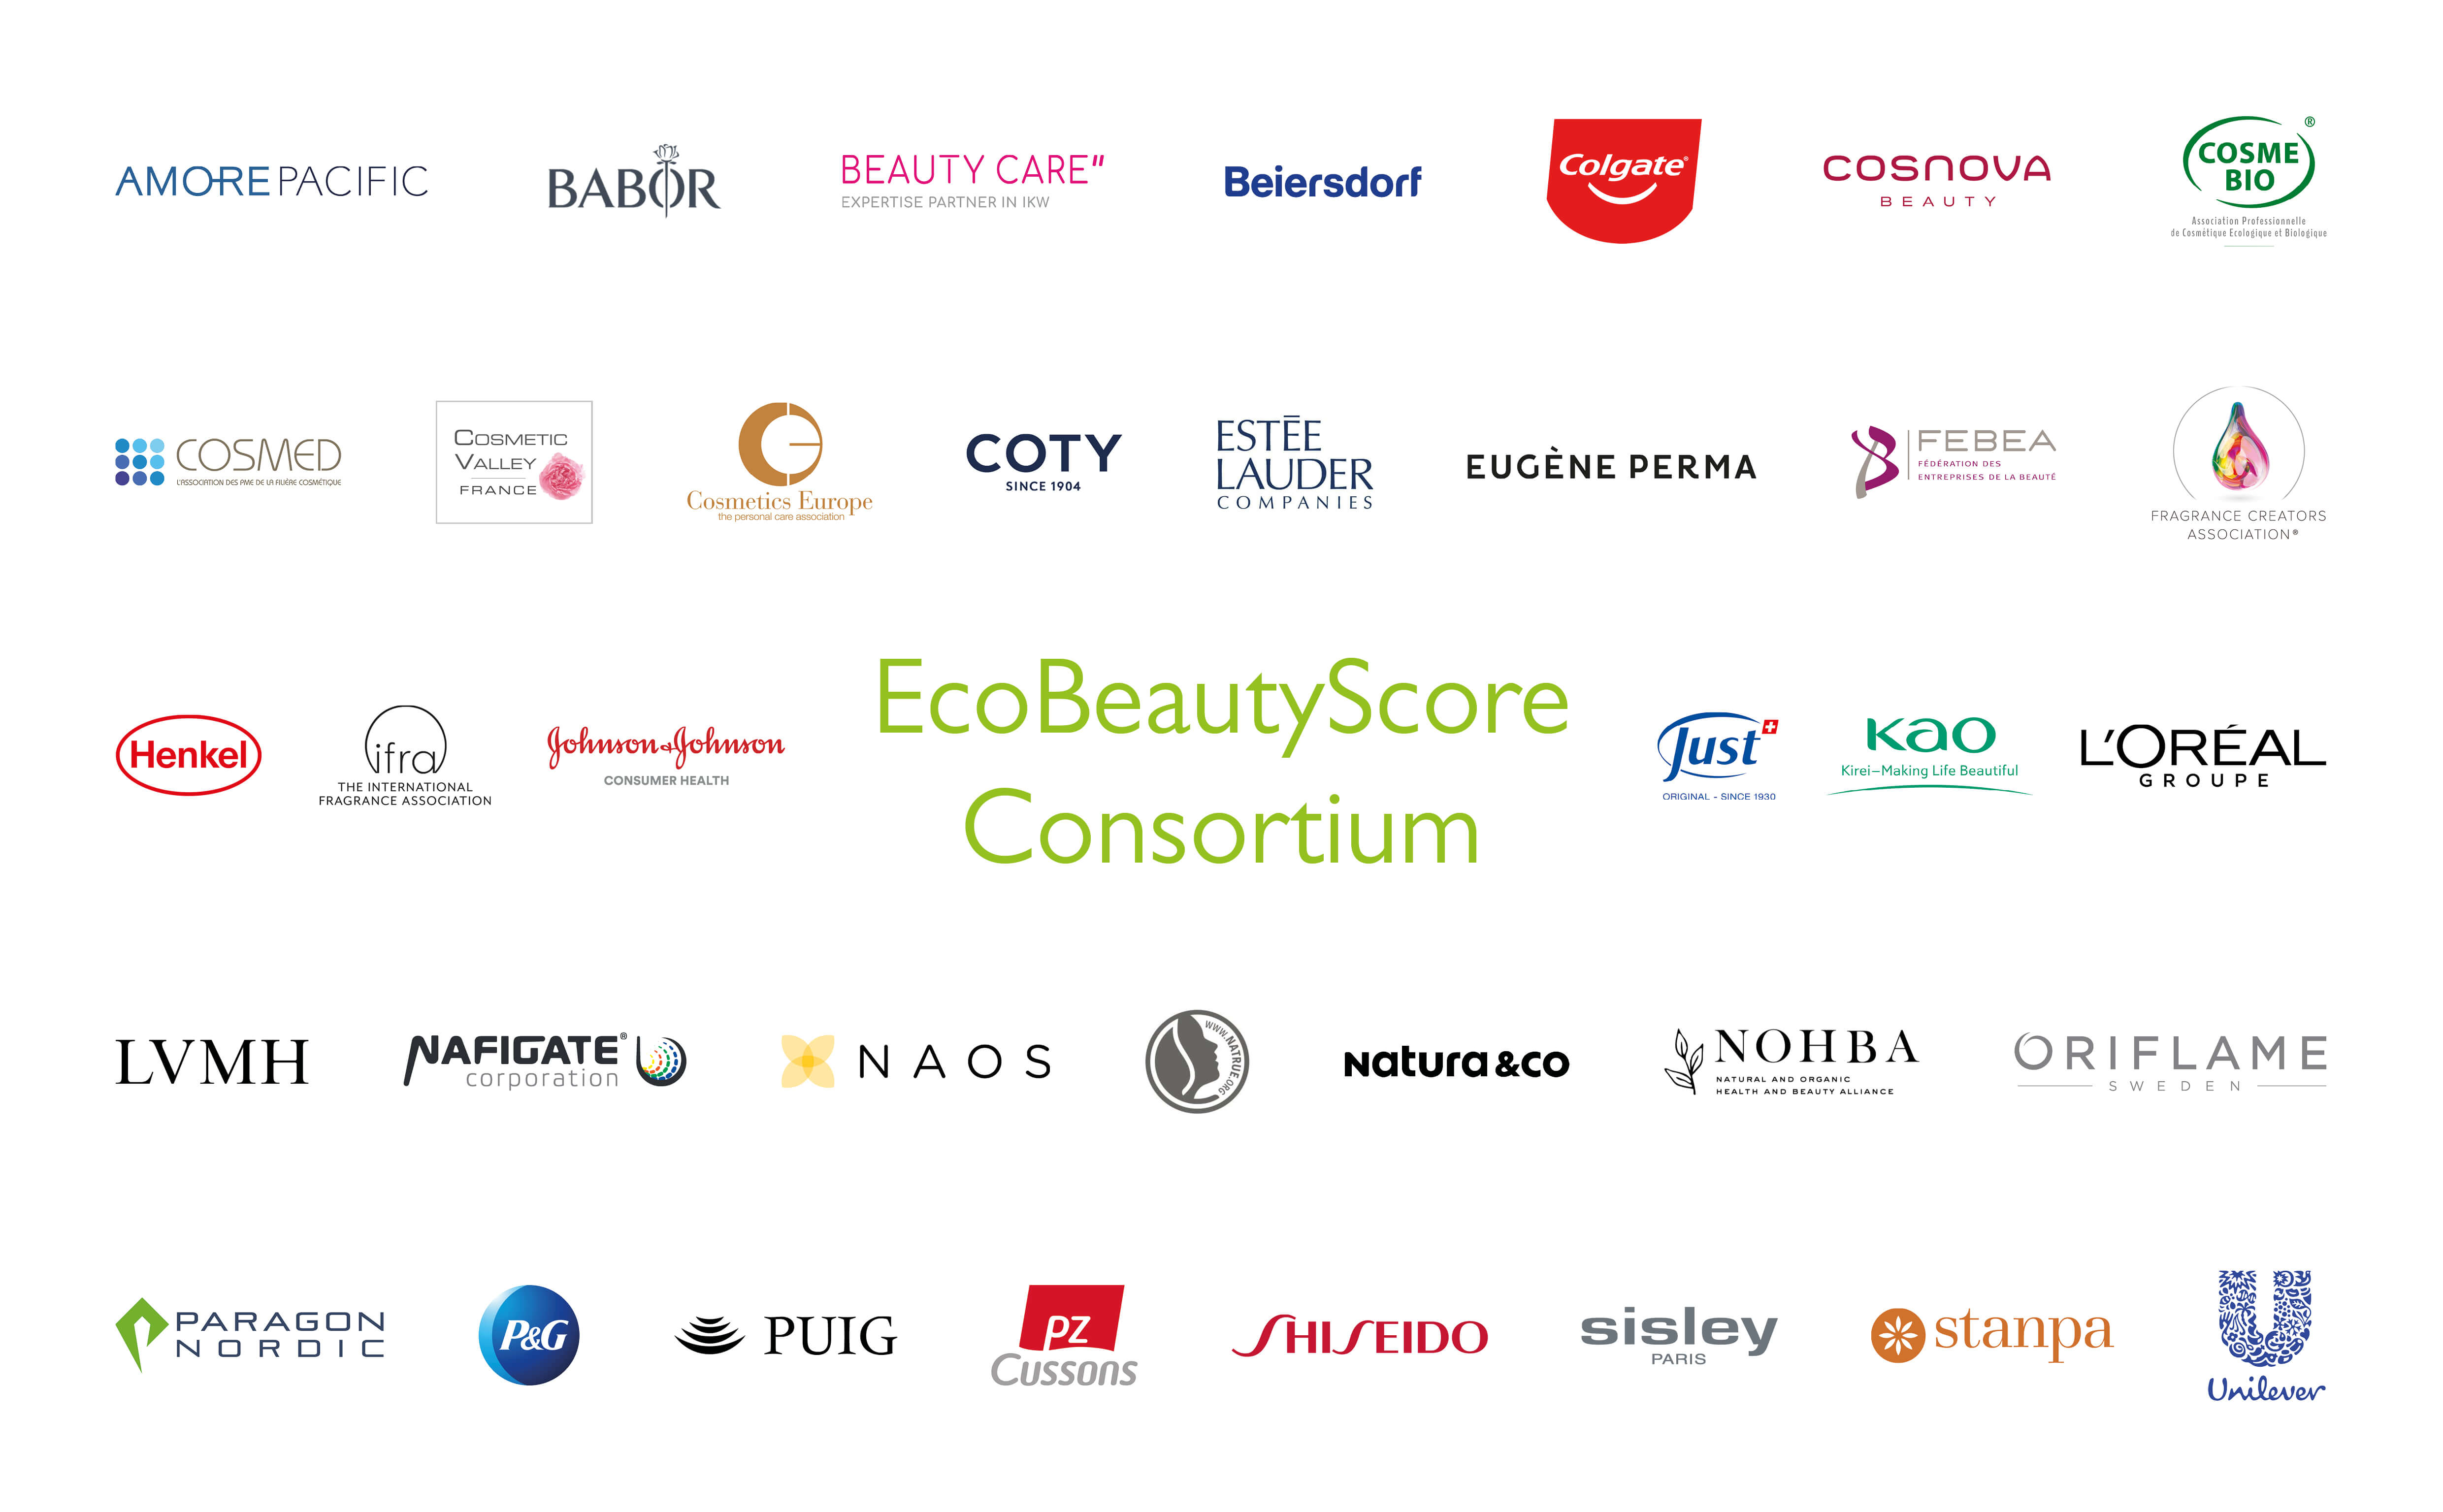 Colgate-Palmolive and 36 other companies and organizations create EcoScoreBeauty Consortium